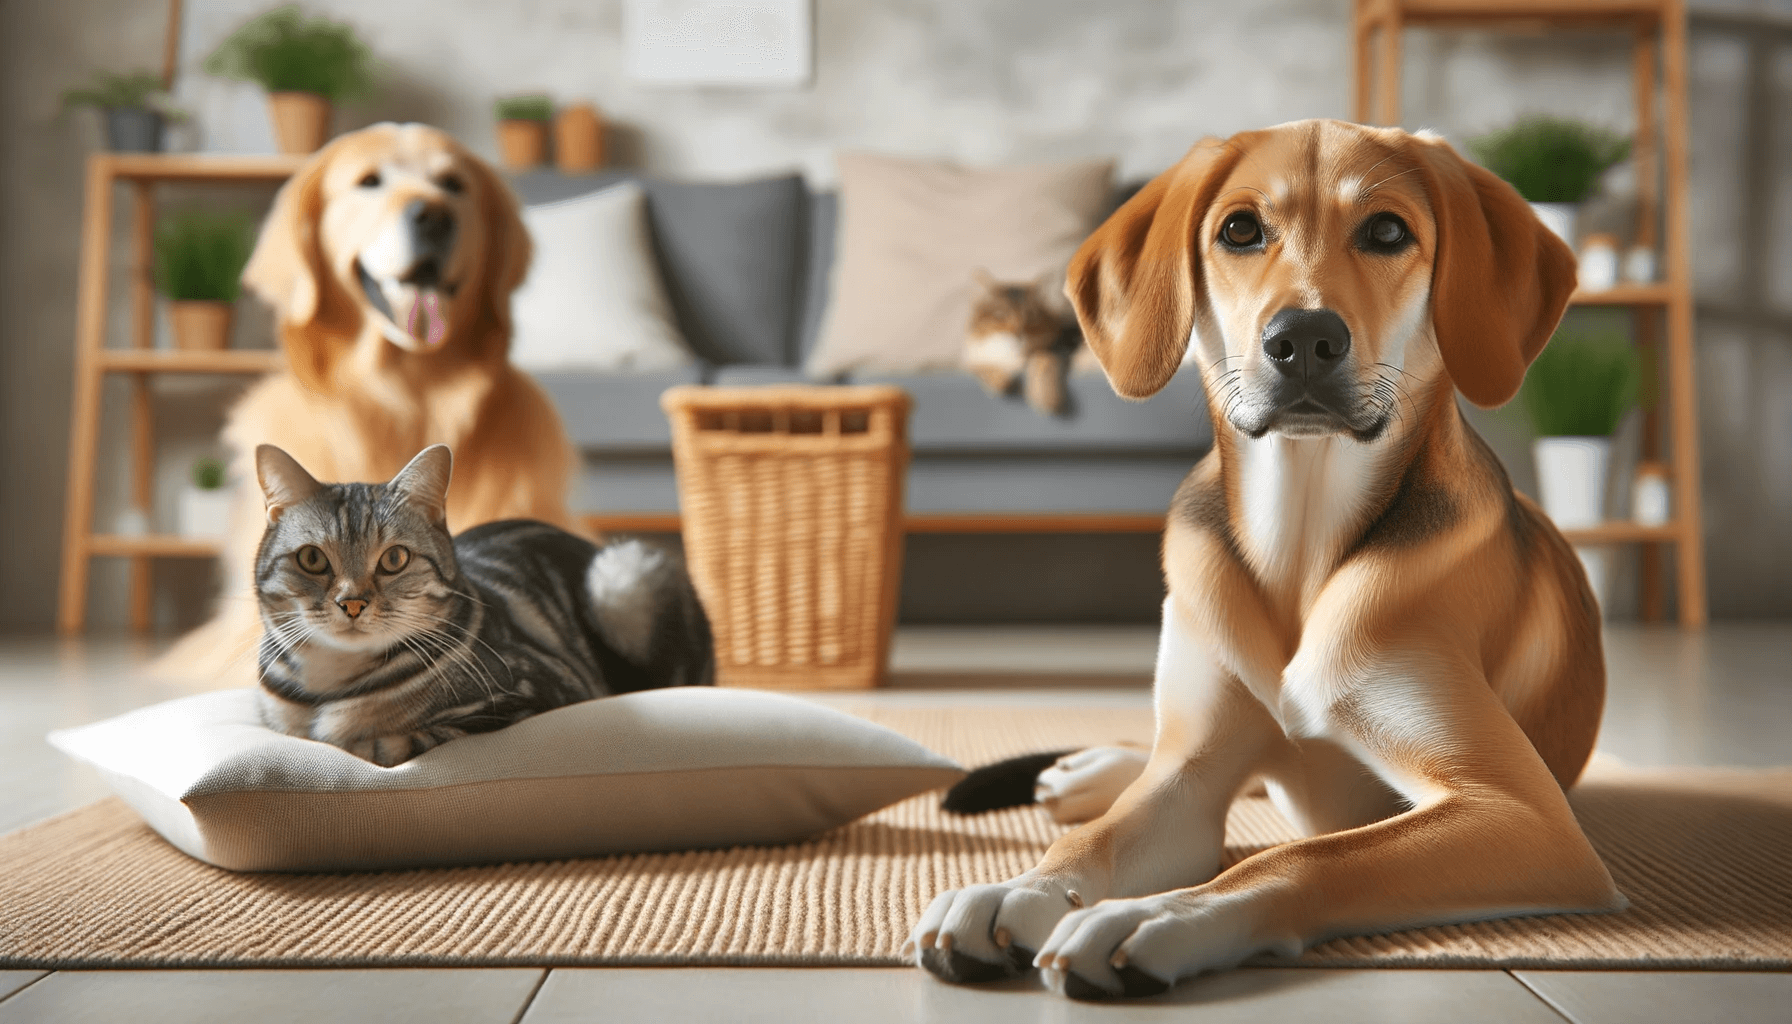 A Lab Hound Mix peacefully coexisting with a cat and another dog, proving its compatibility with other pets